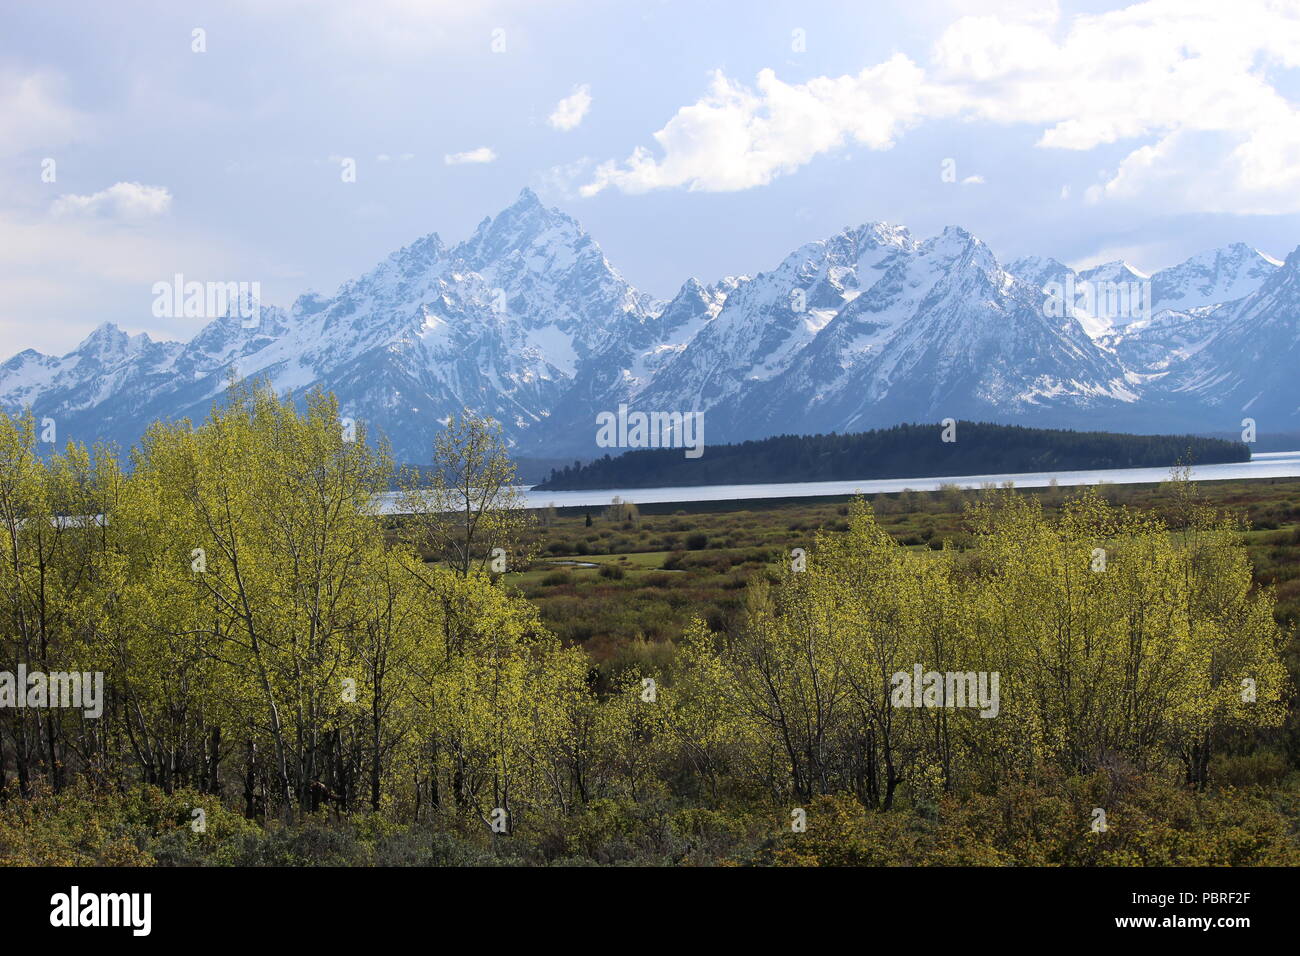 The beauty of Wyoming, Yellowstone, and the Tetons. Stock Photo